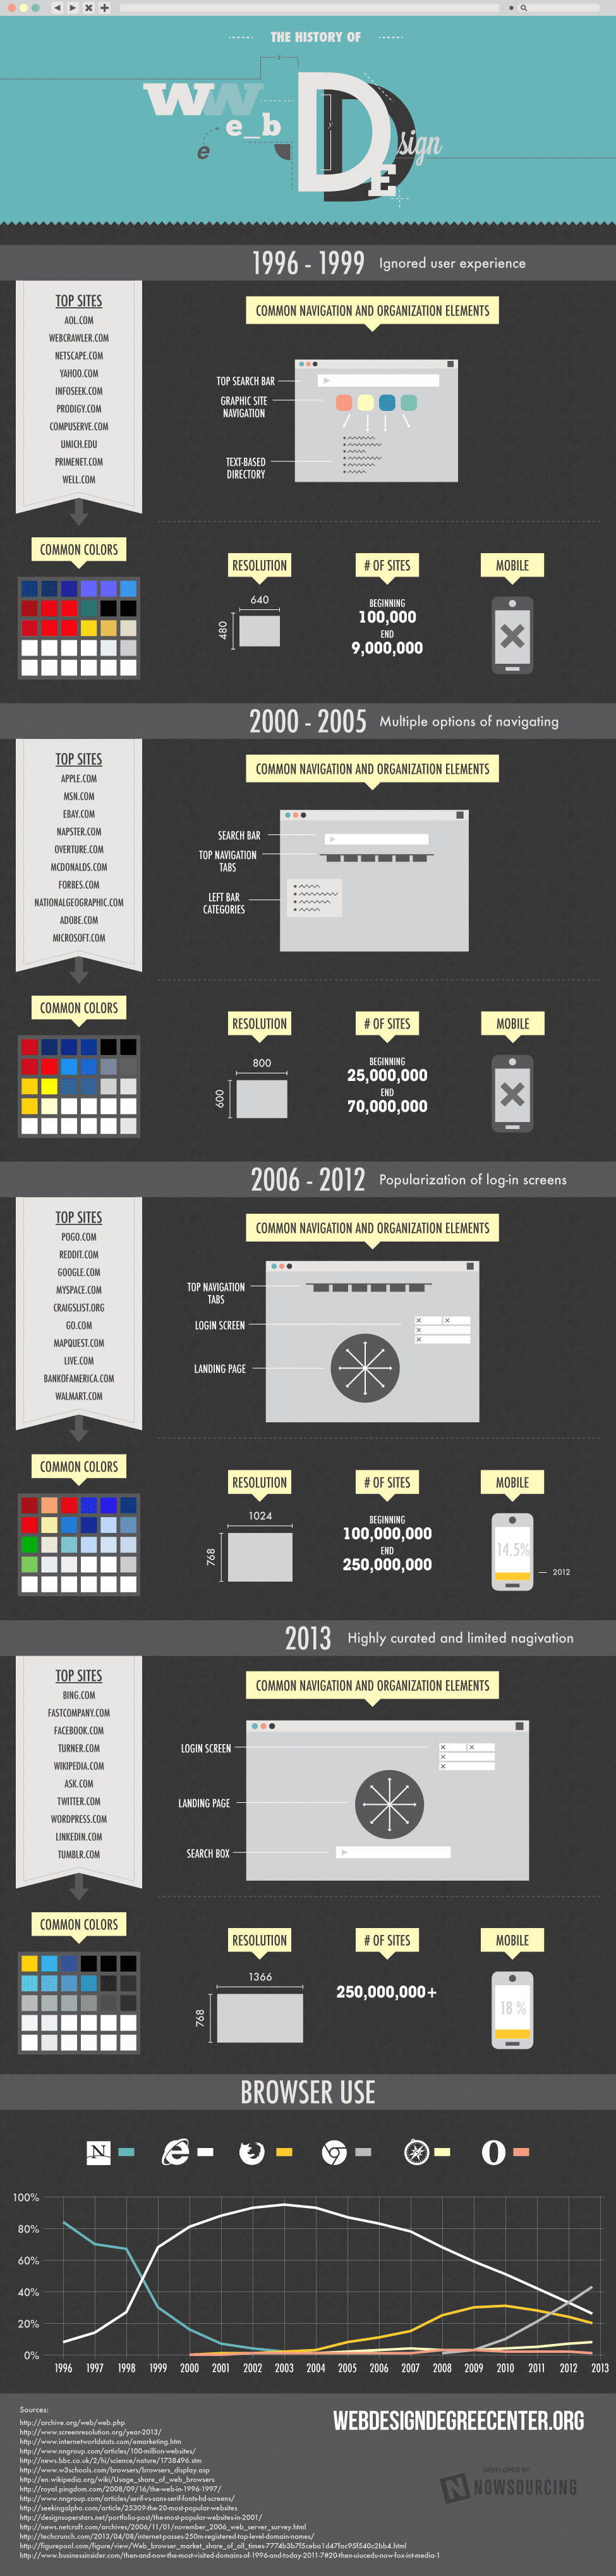 Web Design History & How The Internet Grew [Infographic]